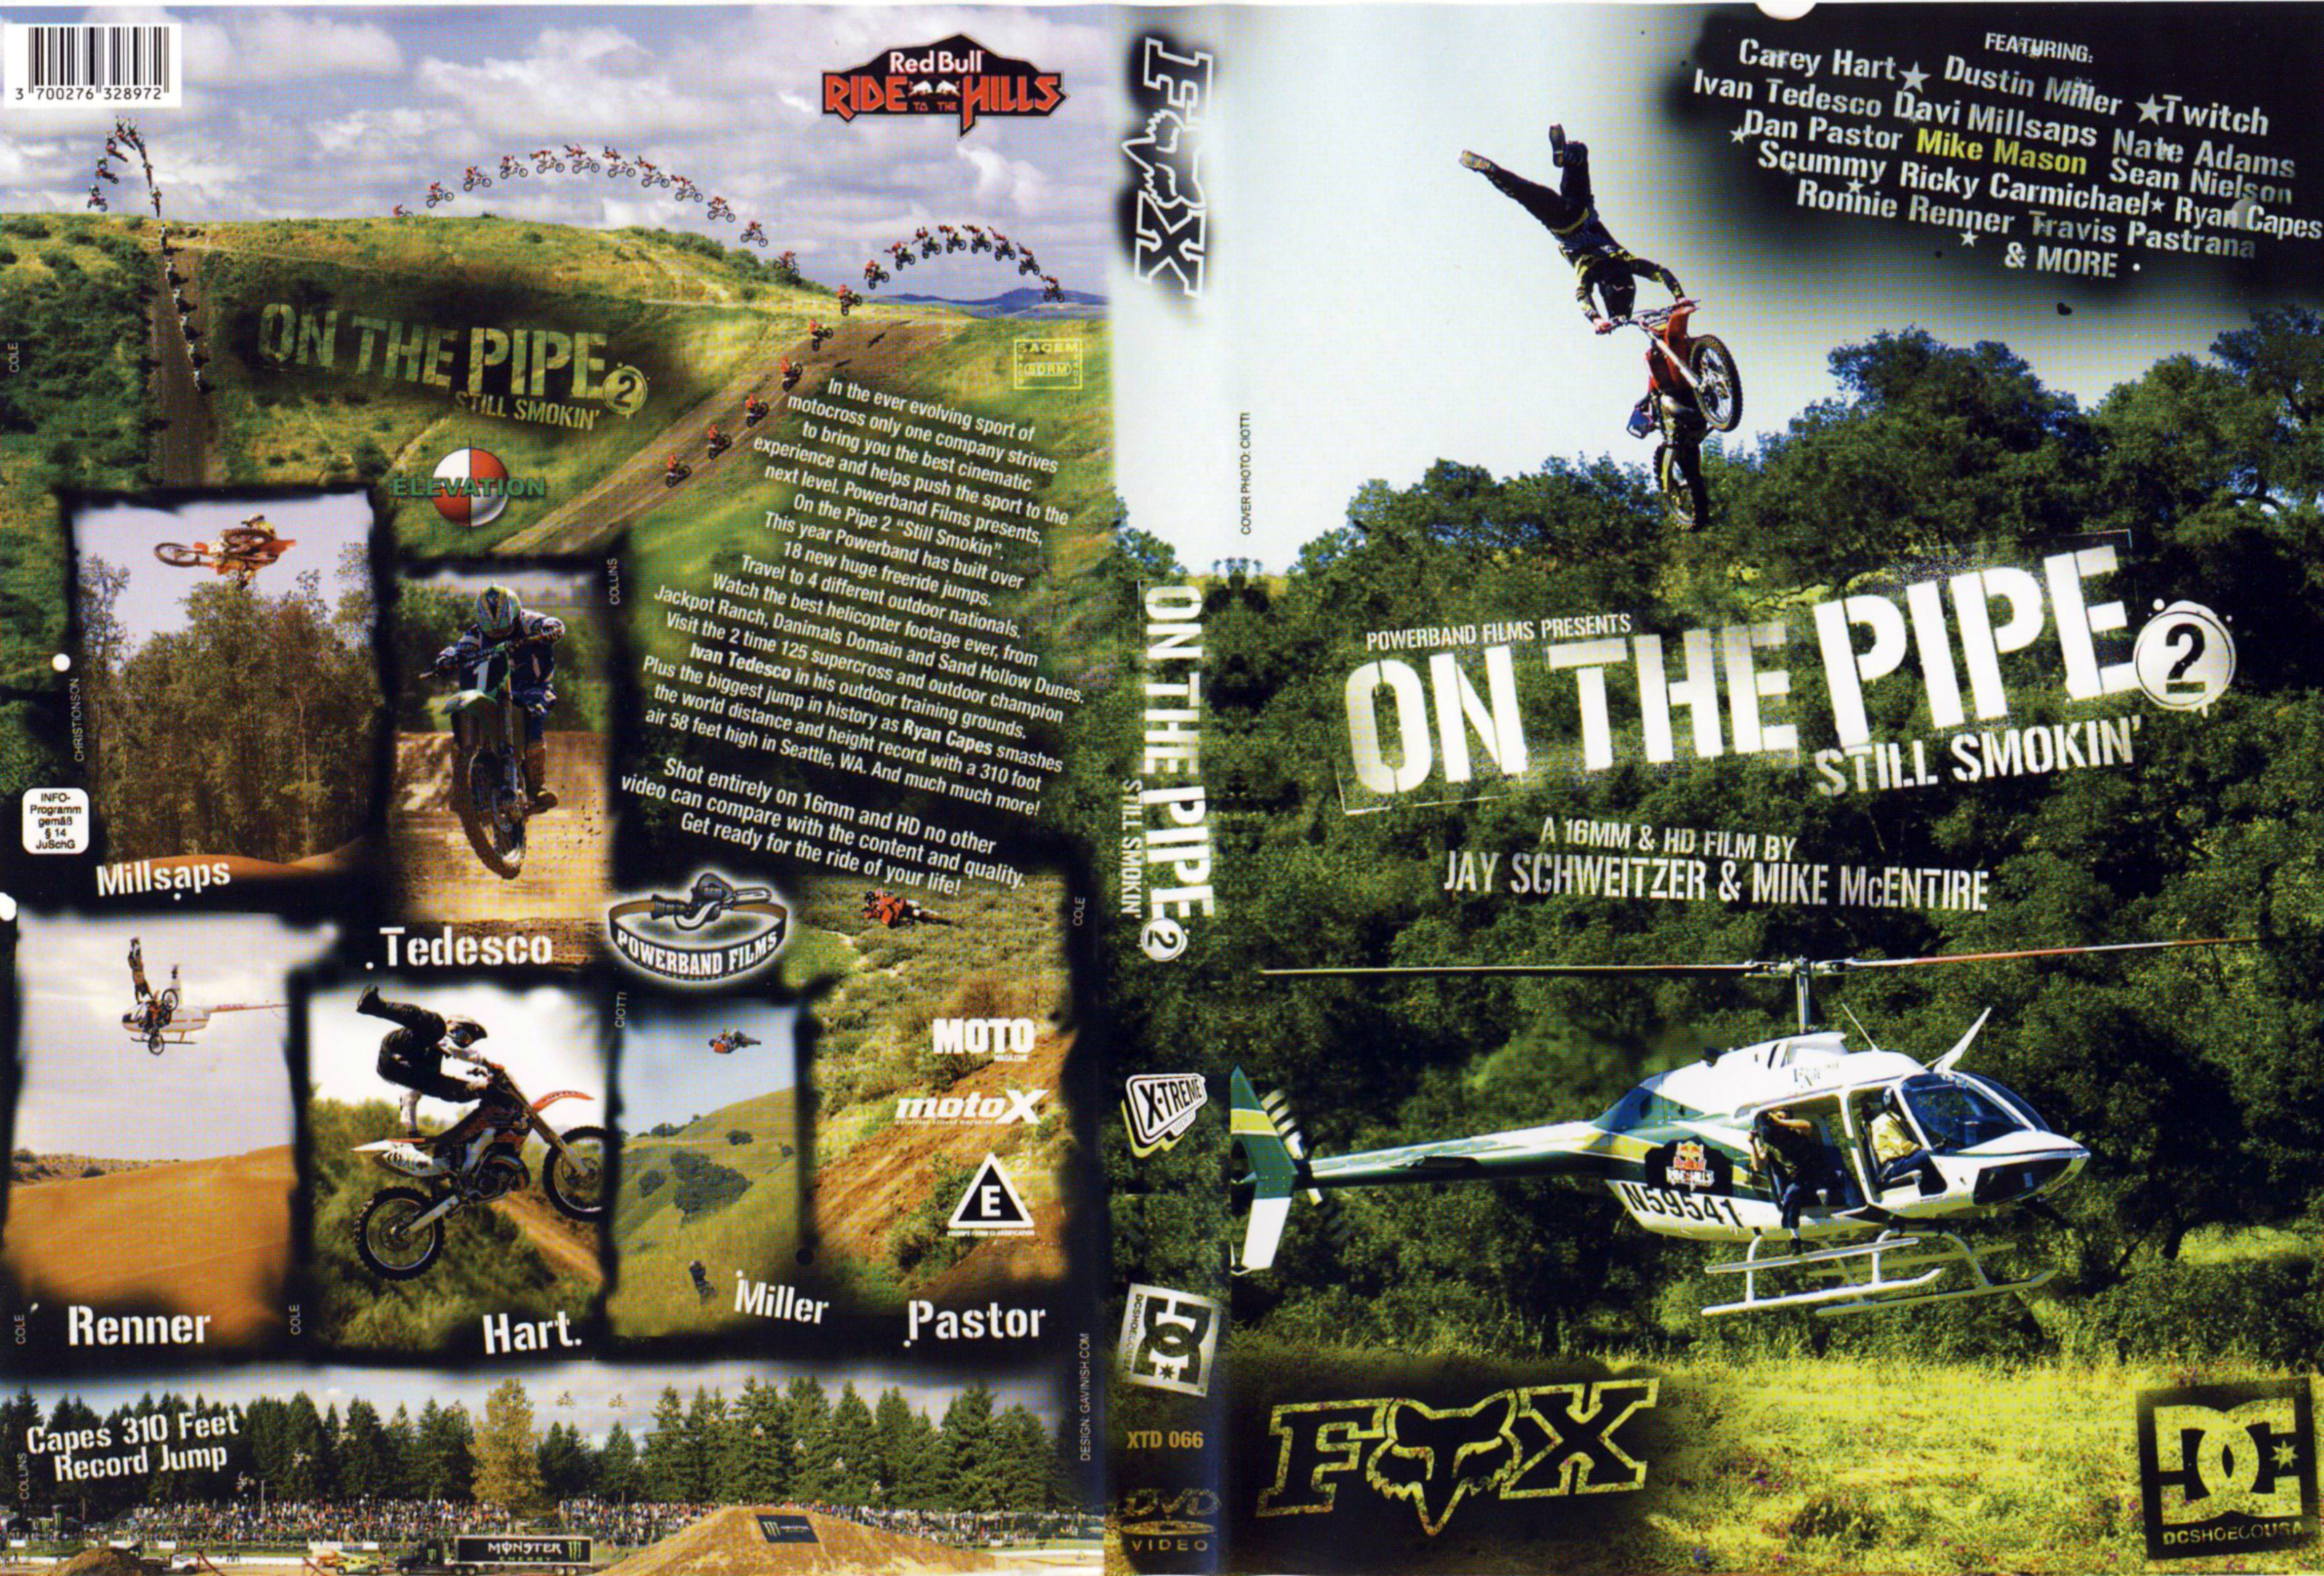 Jaquette DVD One the pipe 2